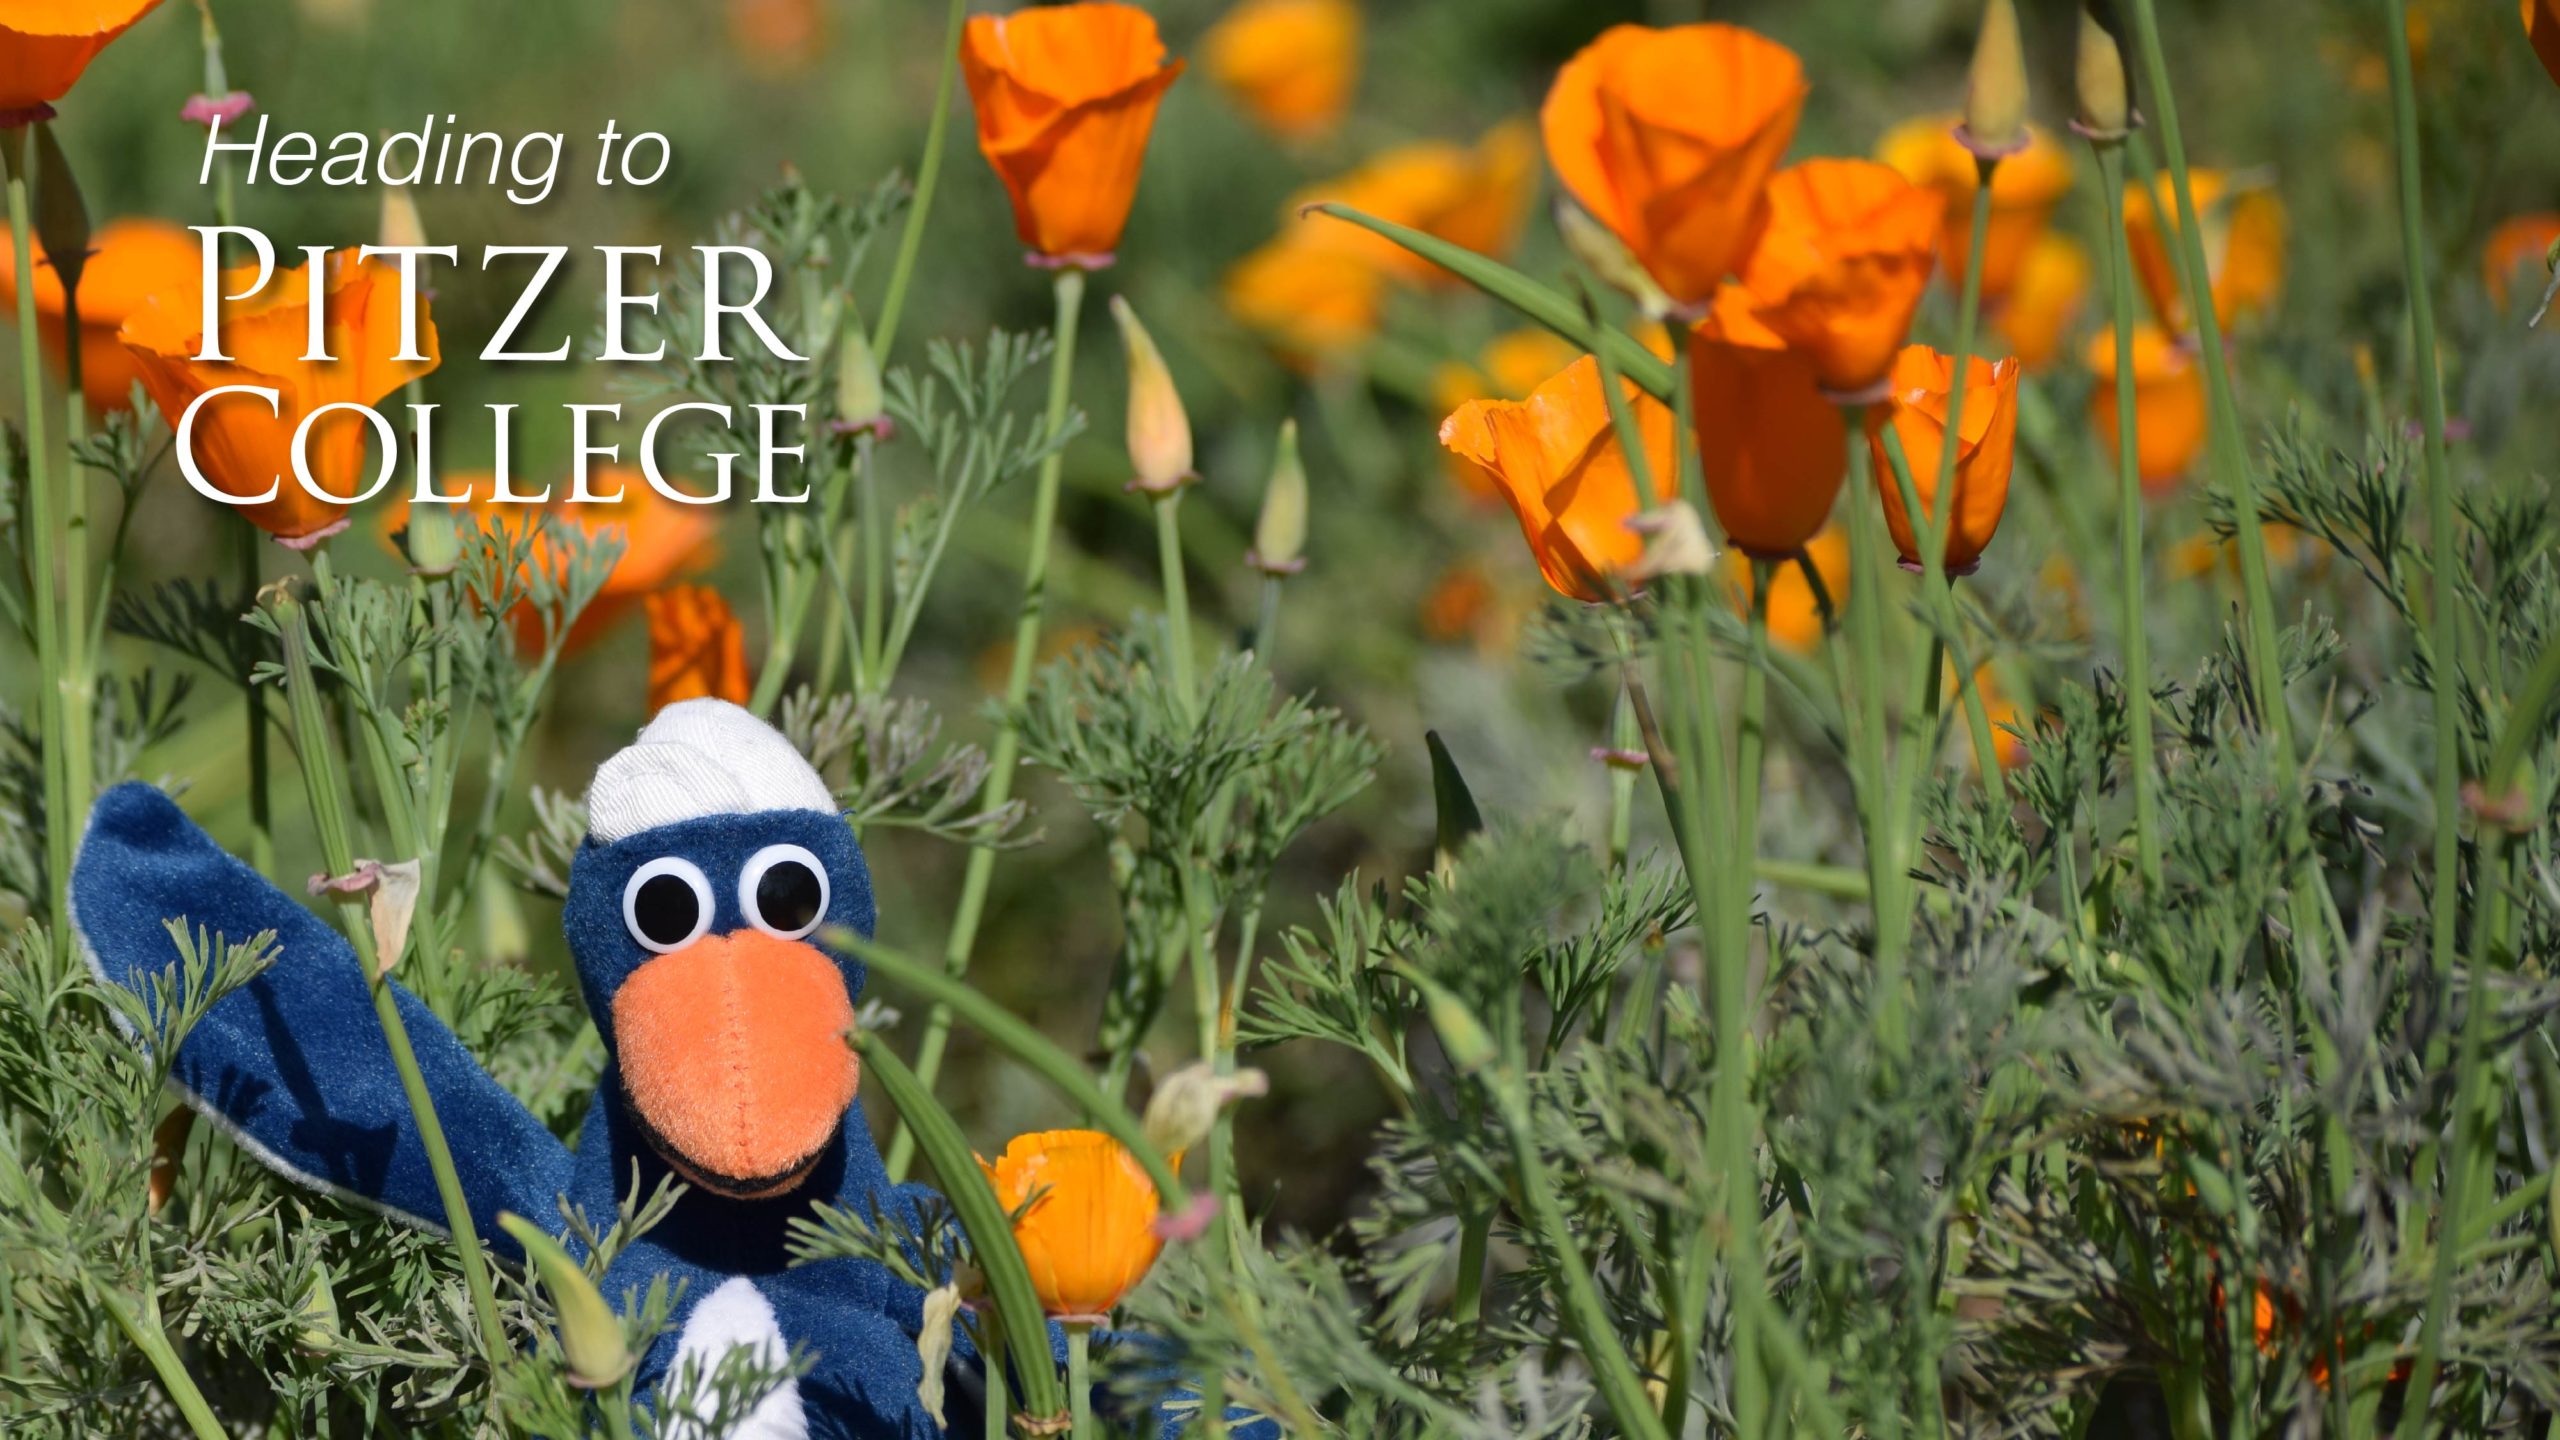 I'm going to Pitzer College!